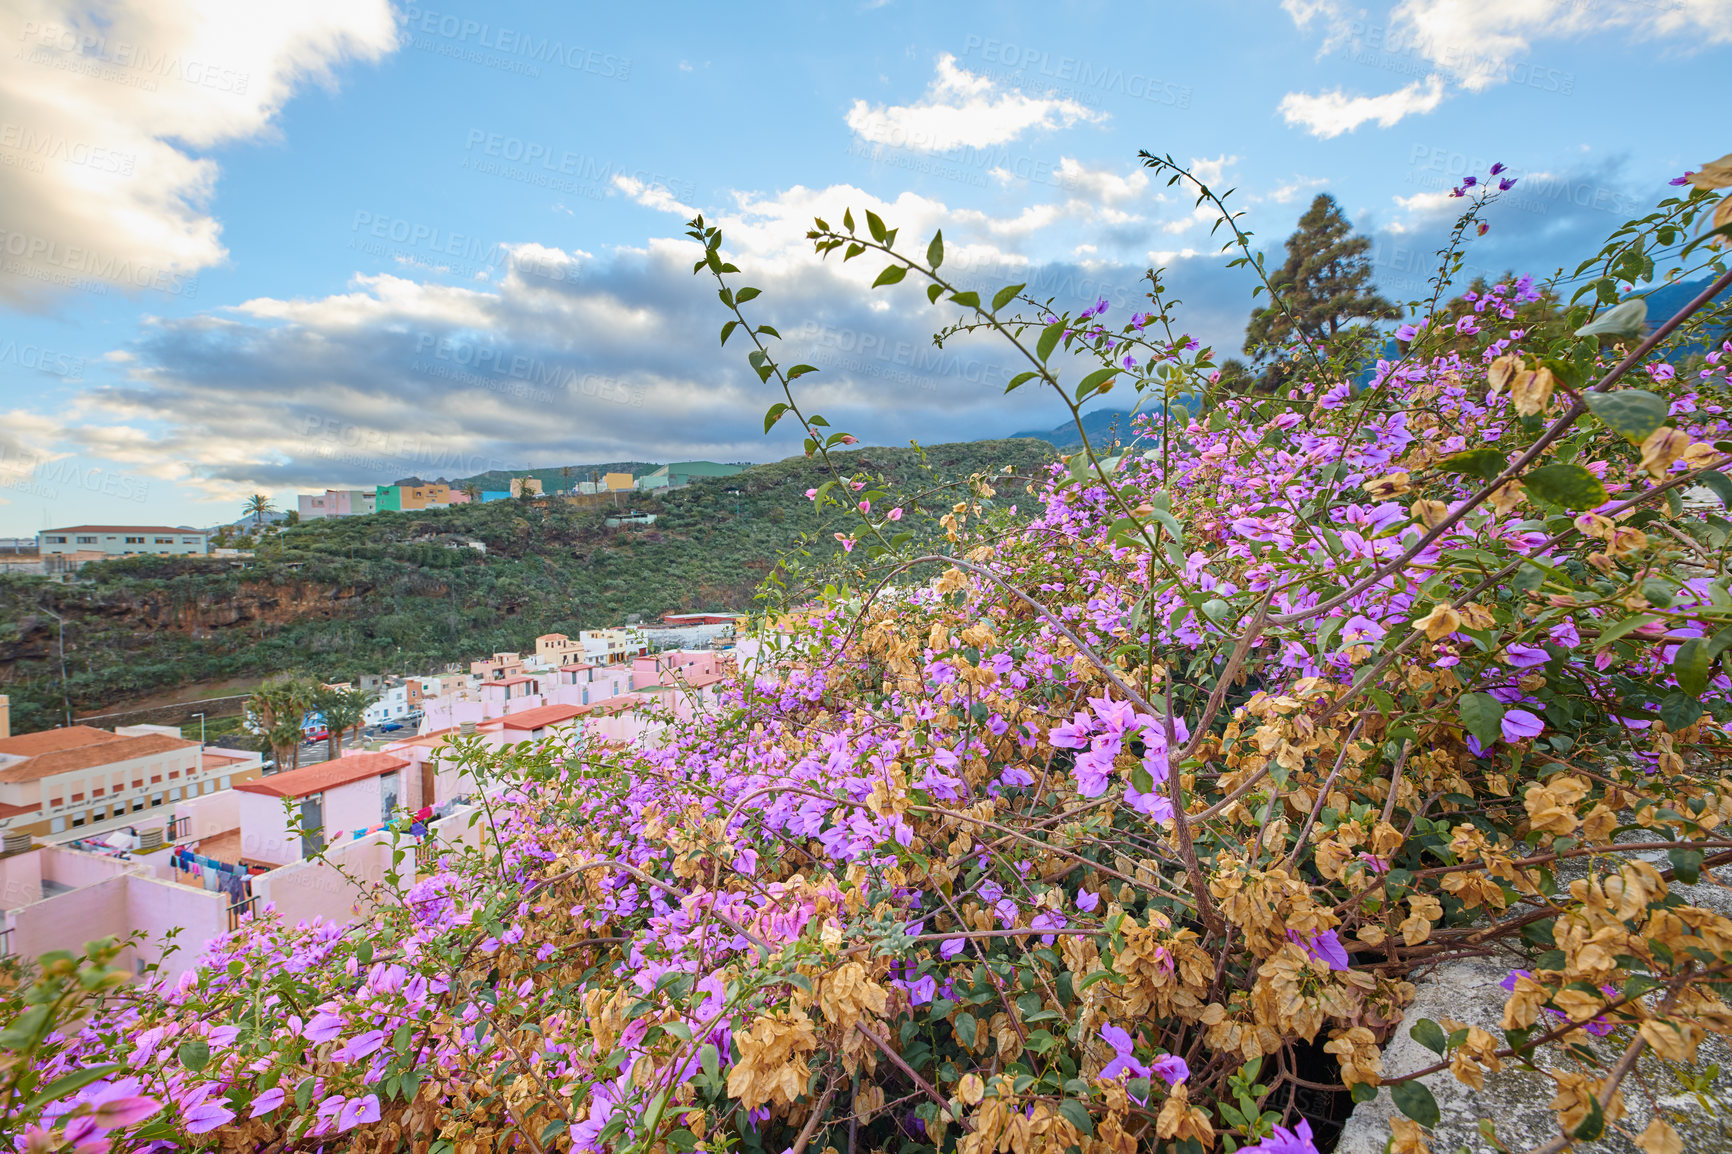 Buy stock photo Purple bougainvillea flowers blooming, blossoming, growing on bush shrub or tree in Santa Cruz, La Palma. Scenic hills, landscape view of local town, blue sky with clouds in tourist destination Spain